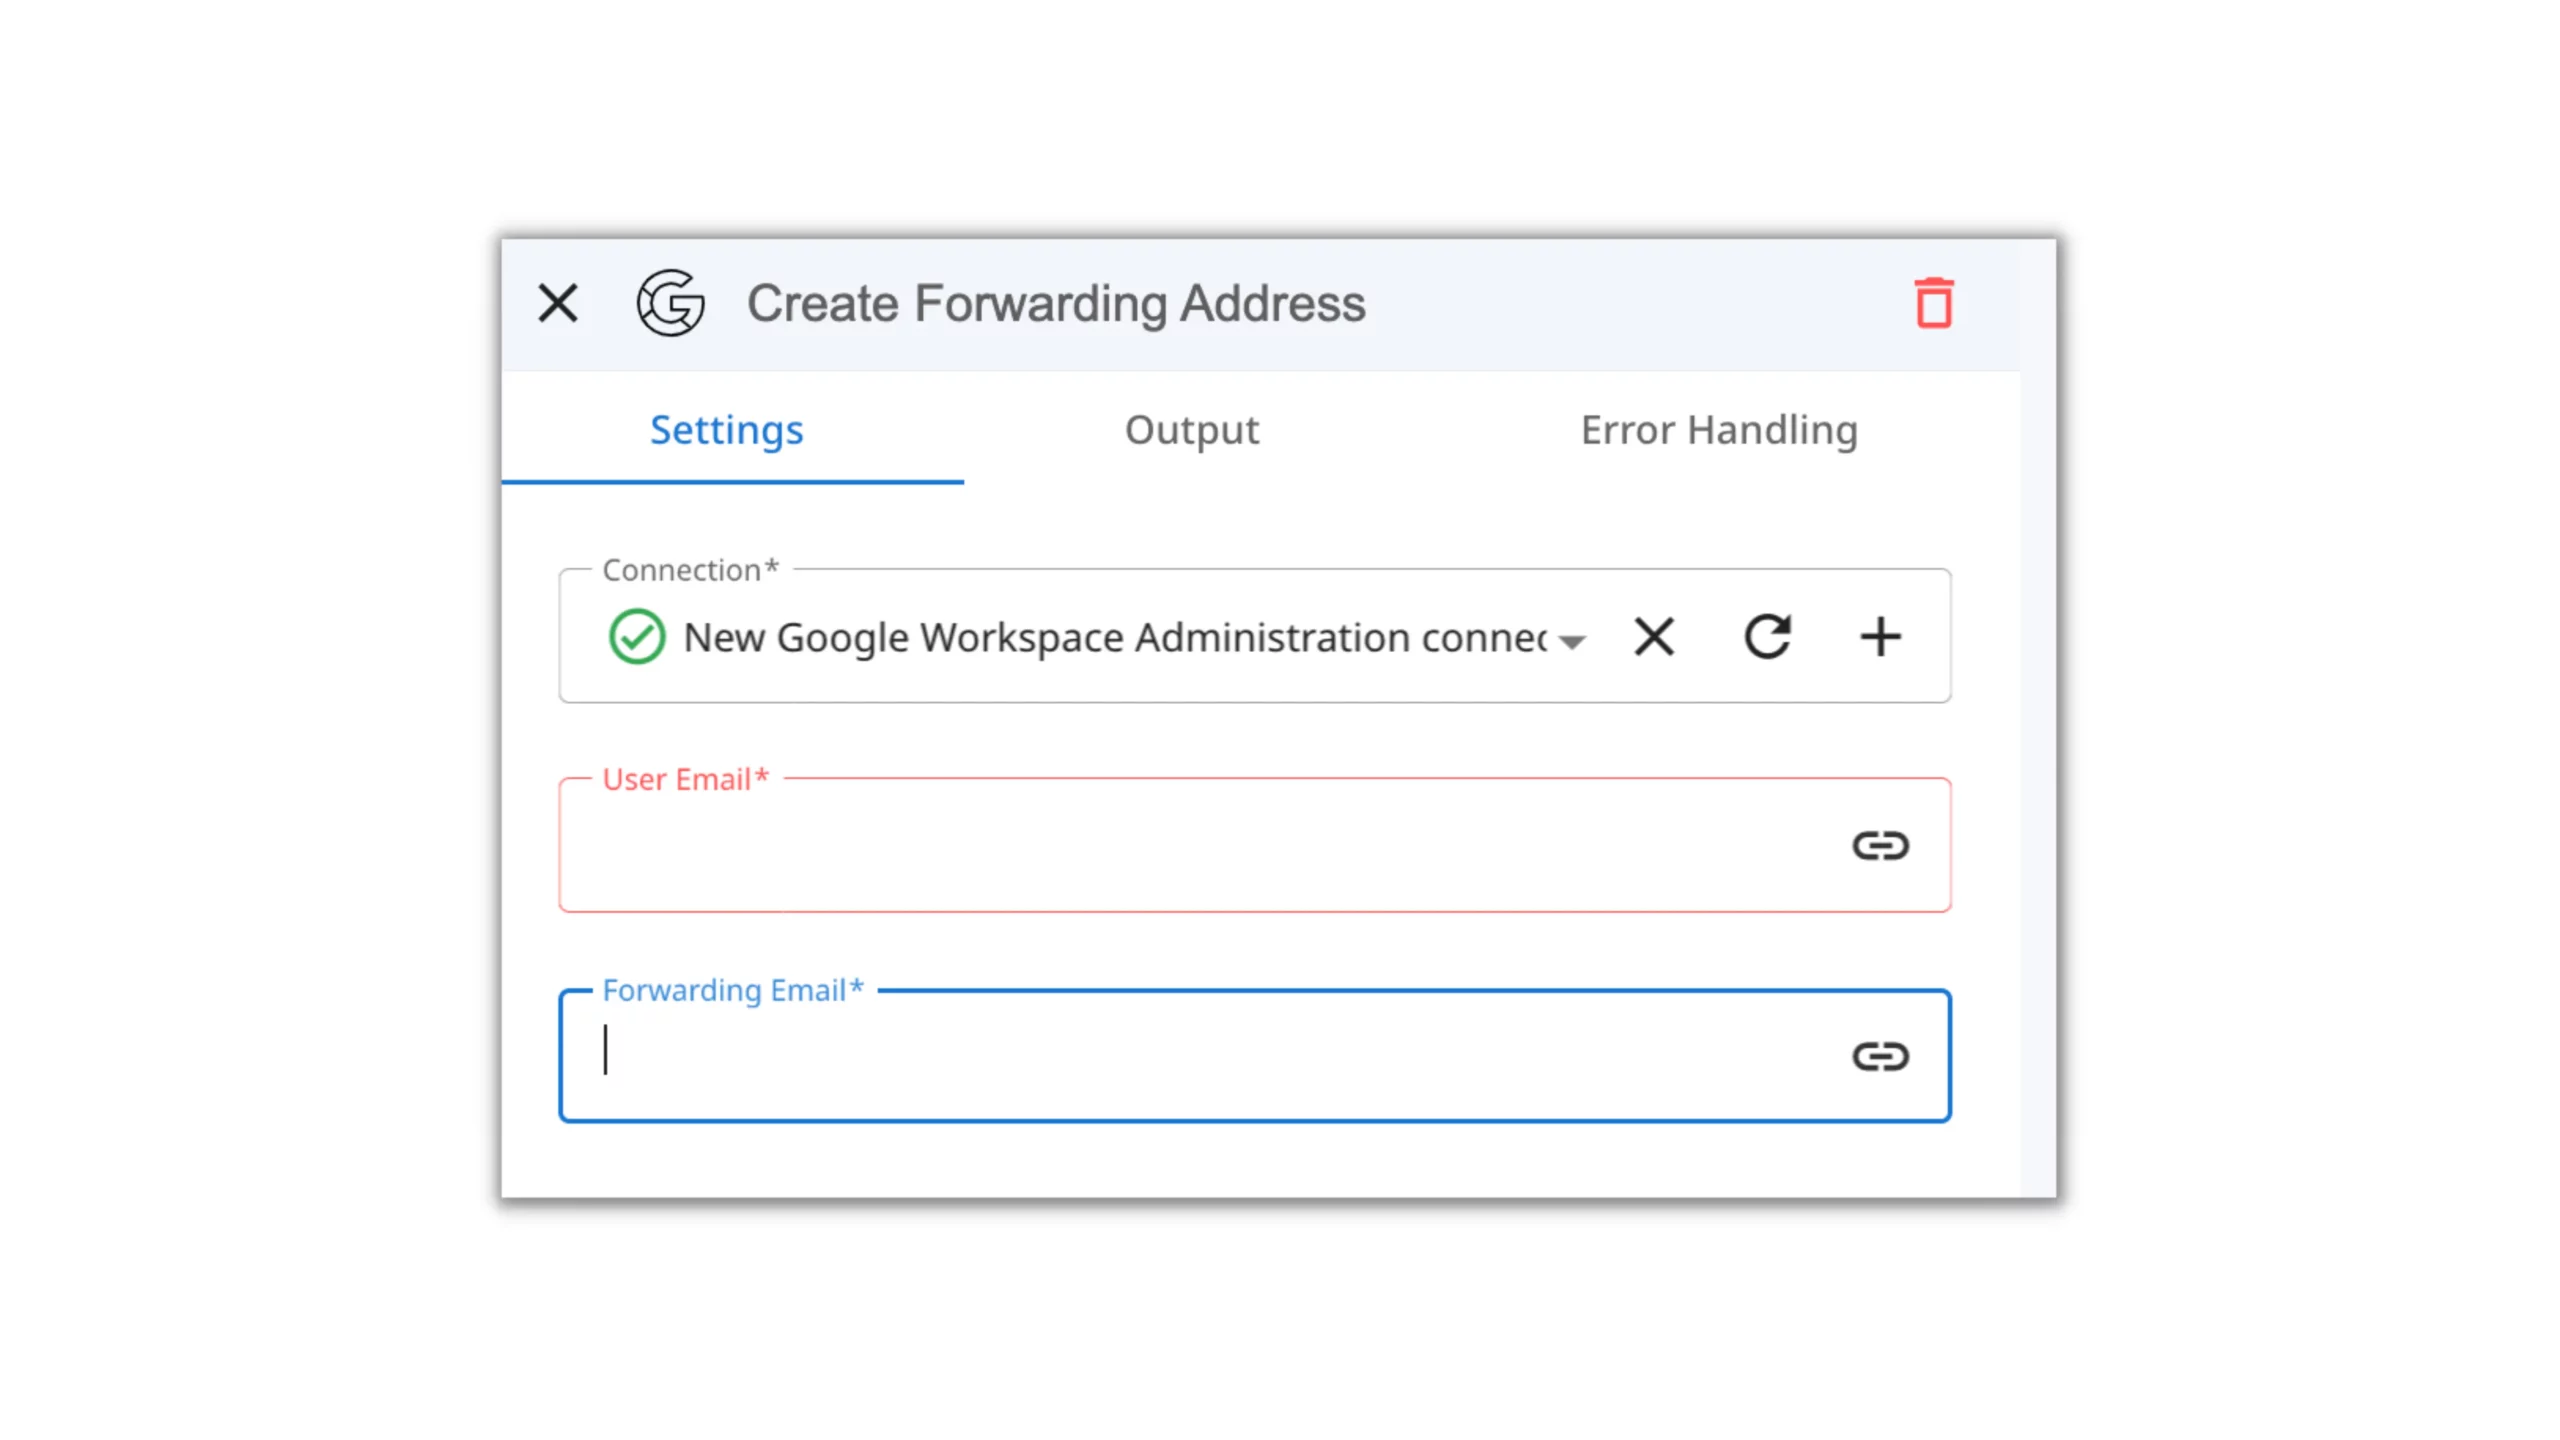 The example of gmail automation management for forwarding addresses.